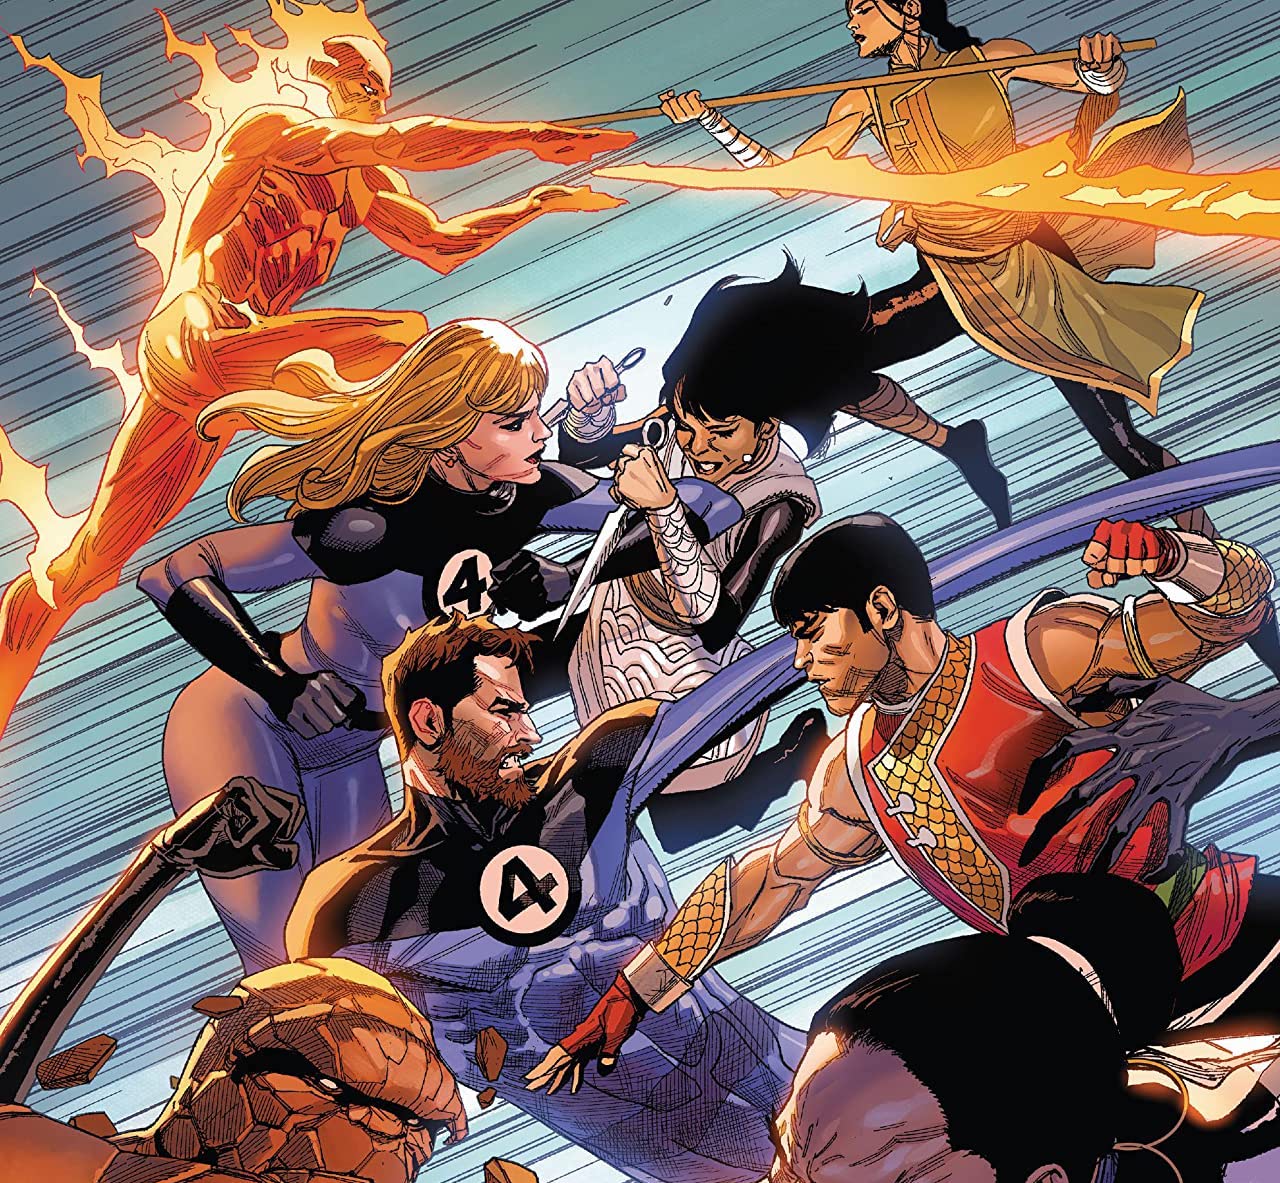 'Shang-Chi' #4 changes Shang-Chi's familial dynamic in a big way